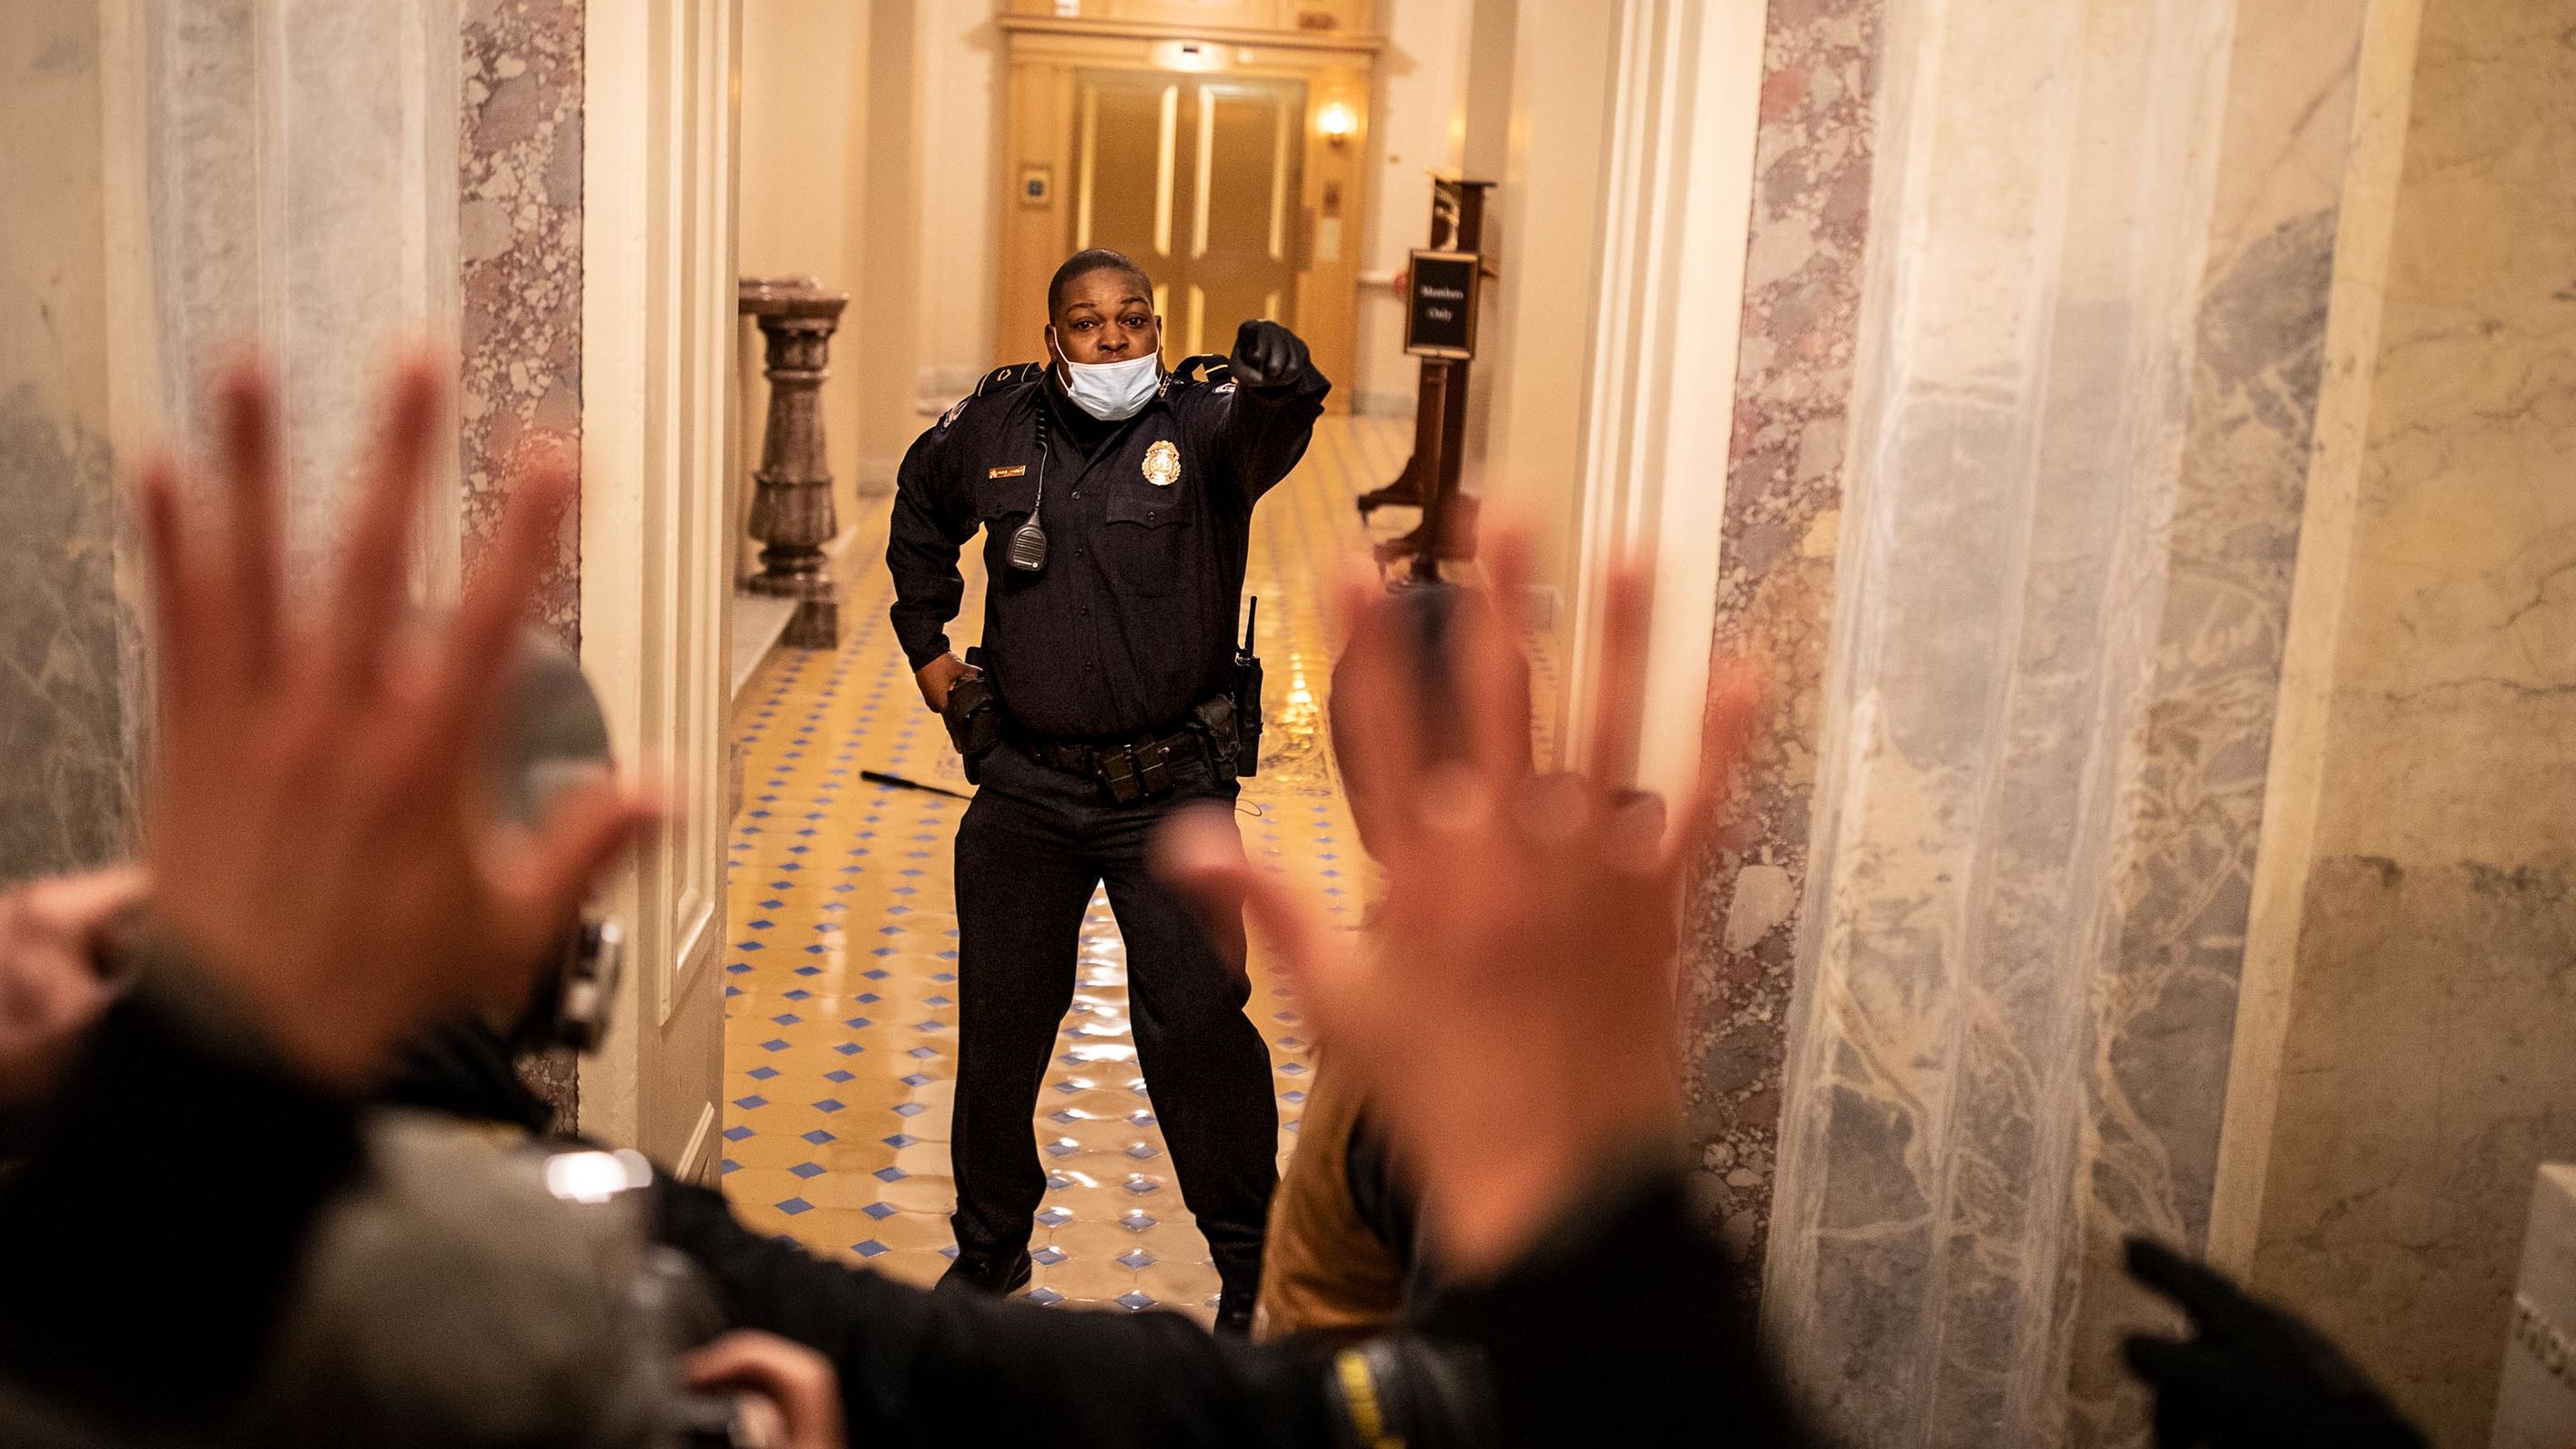 US Capitol Police Officer Eugene Goodman confronts protesters as they storm the building. <a href="https://www.cnn.com/2021/01/07/us/capitol-mob-deaths/index.html" target="_blank">Five people died</a> as a result of the riot, including a woman who was fatally shot by police and three people who died of apparent medical emergencies. Among those who died was <a href="https://www.cnn.com/2021/04/19/politics/brian-sicknick-death-us-capitol-riot/index.html" target="_blank">Officer Brian Sicknick,</a> who suffered strokes and died of natural causes a day after responding to the insurrection.